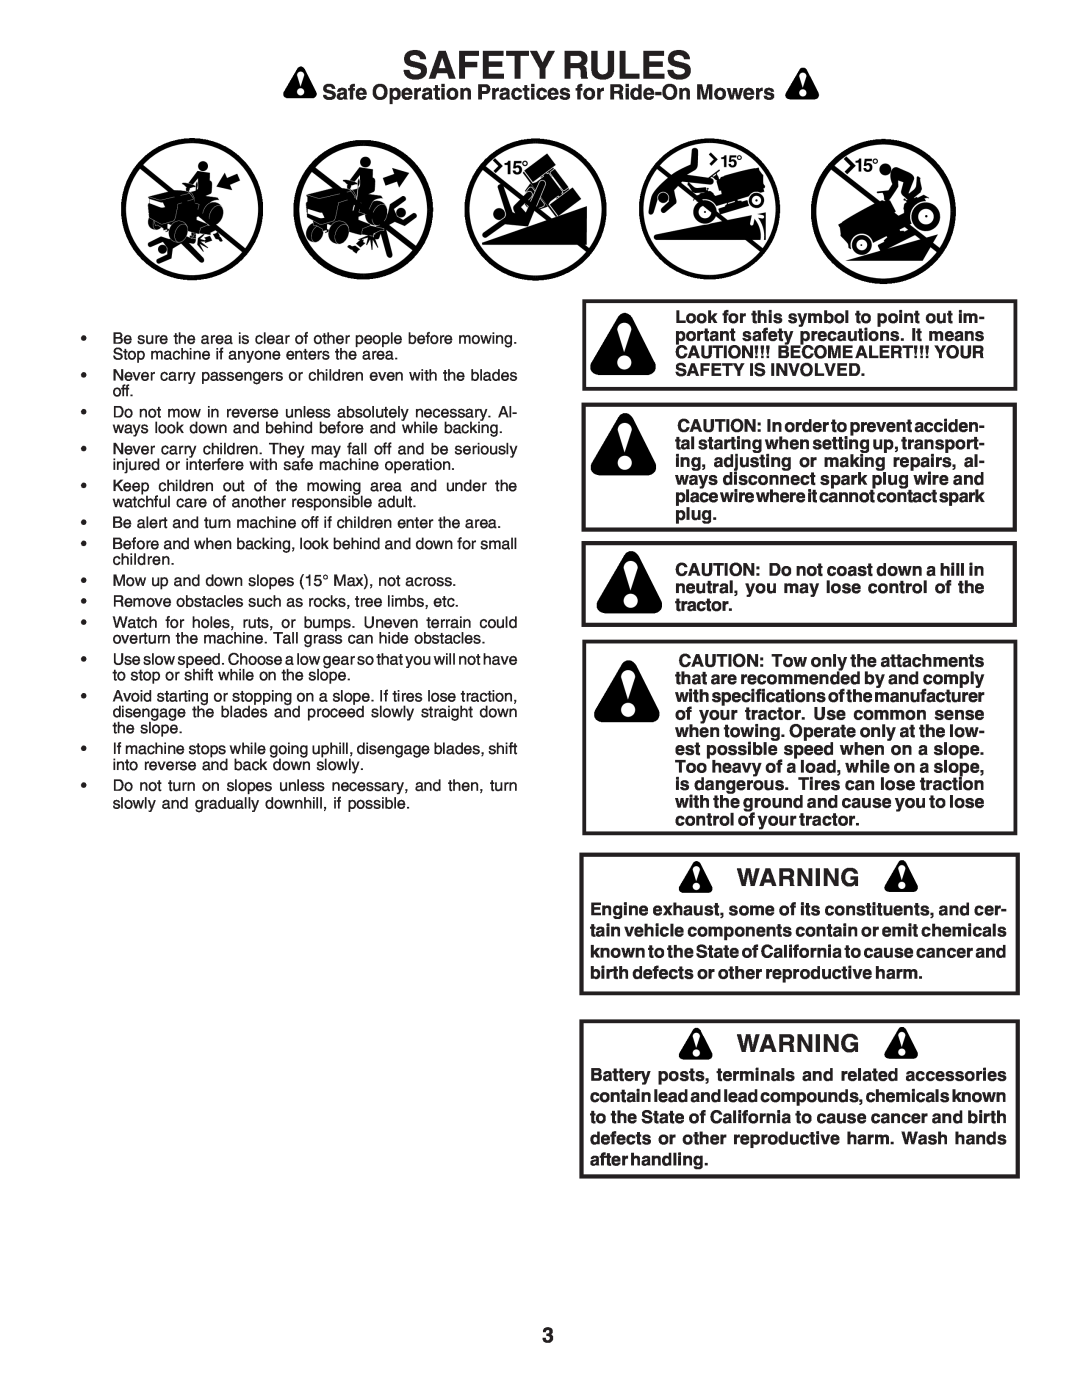 Poulan 183255 owner manual Safety Rules, Safe Operation Practices for Ride-On Mowers 